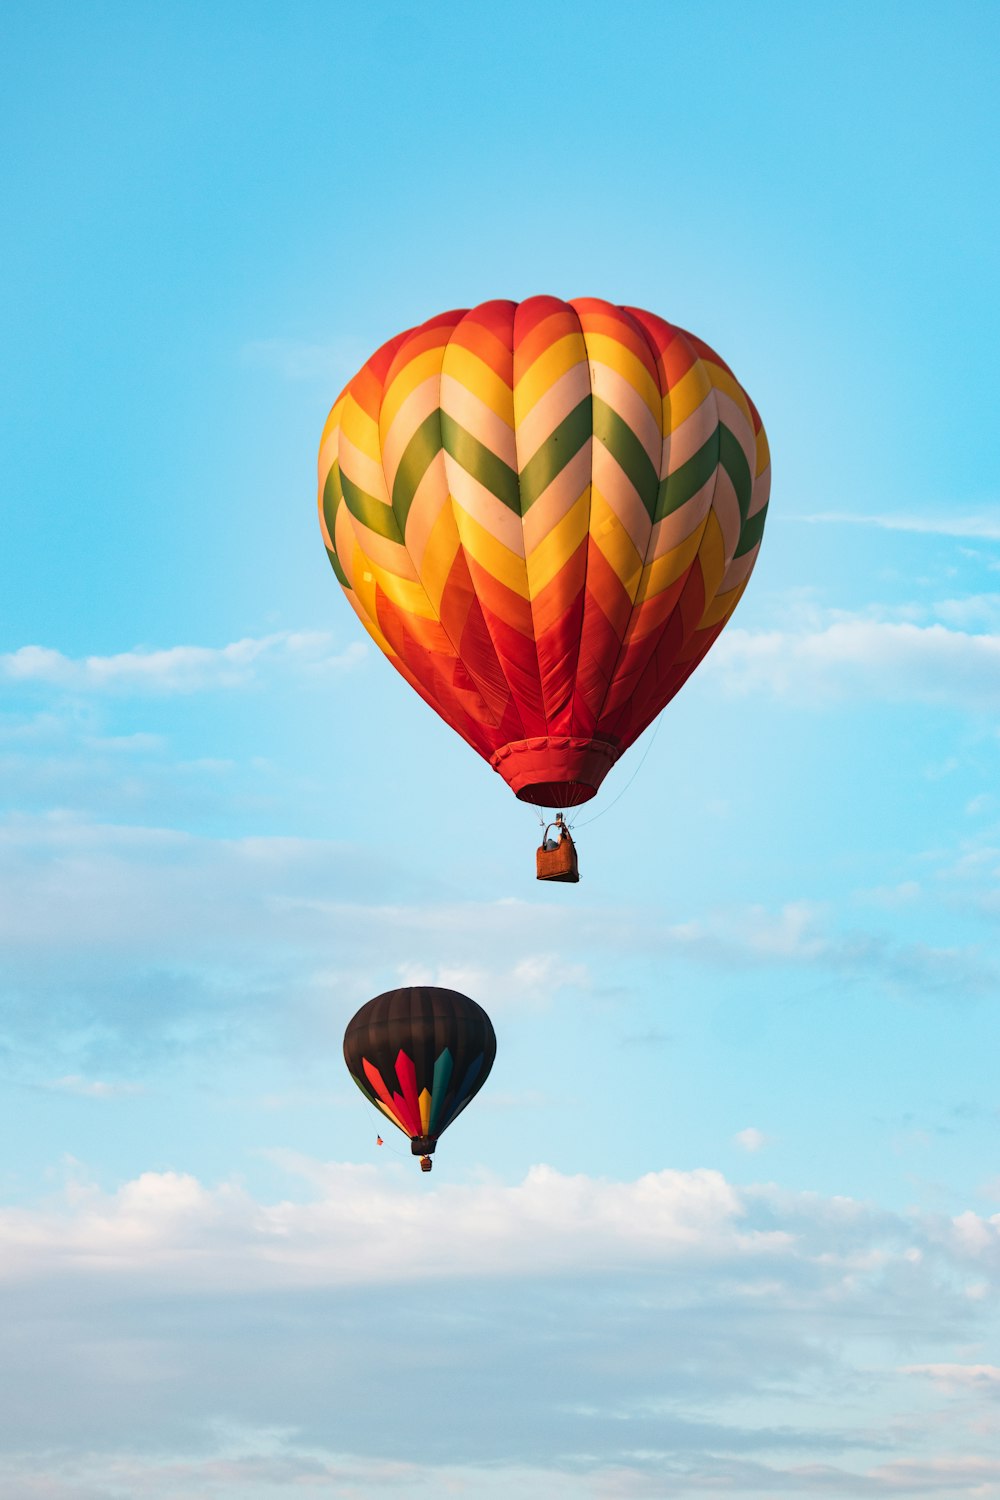 750+ Hot Air Balloon Pictures | Download Free Images on Unsplash